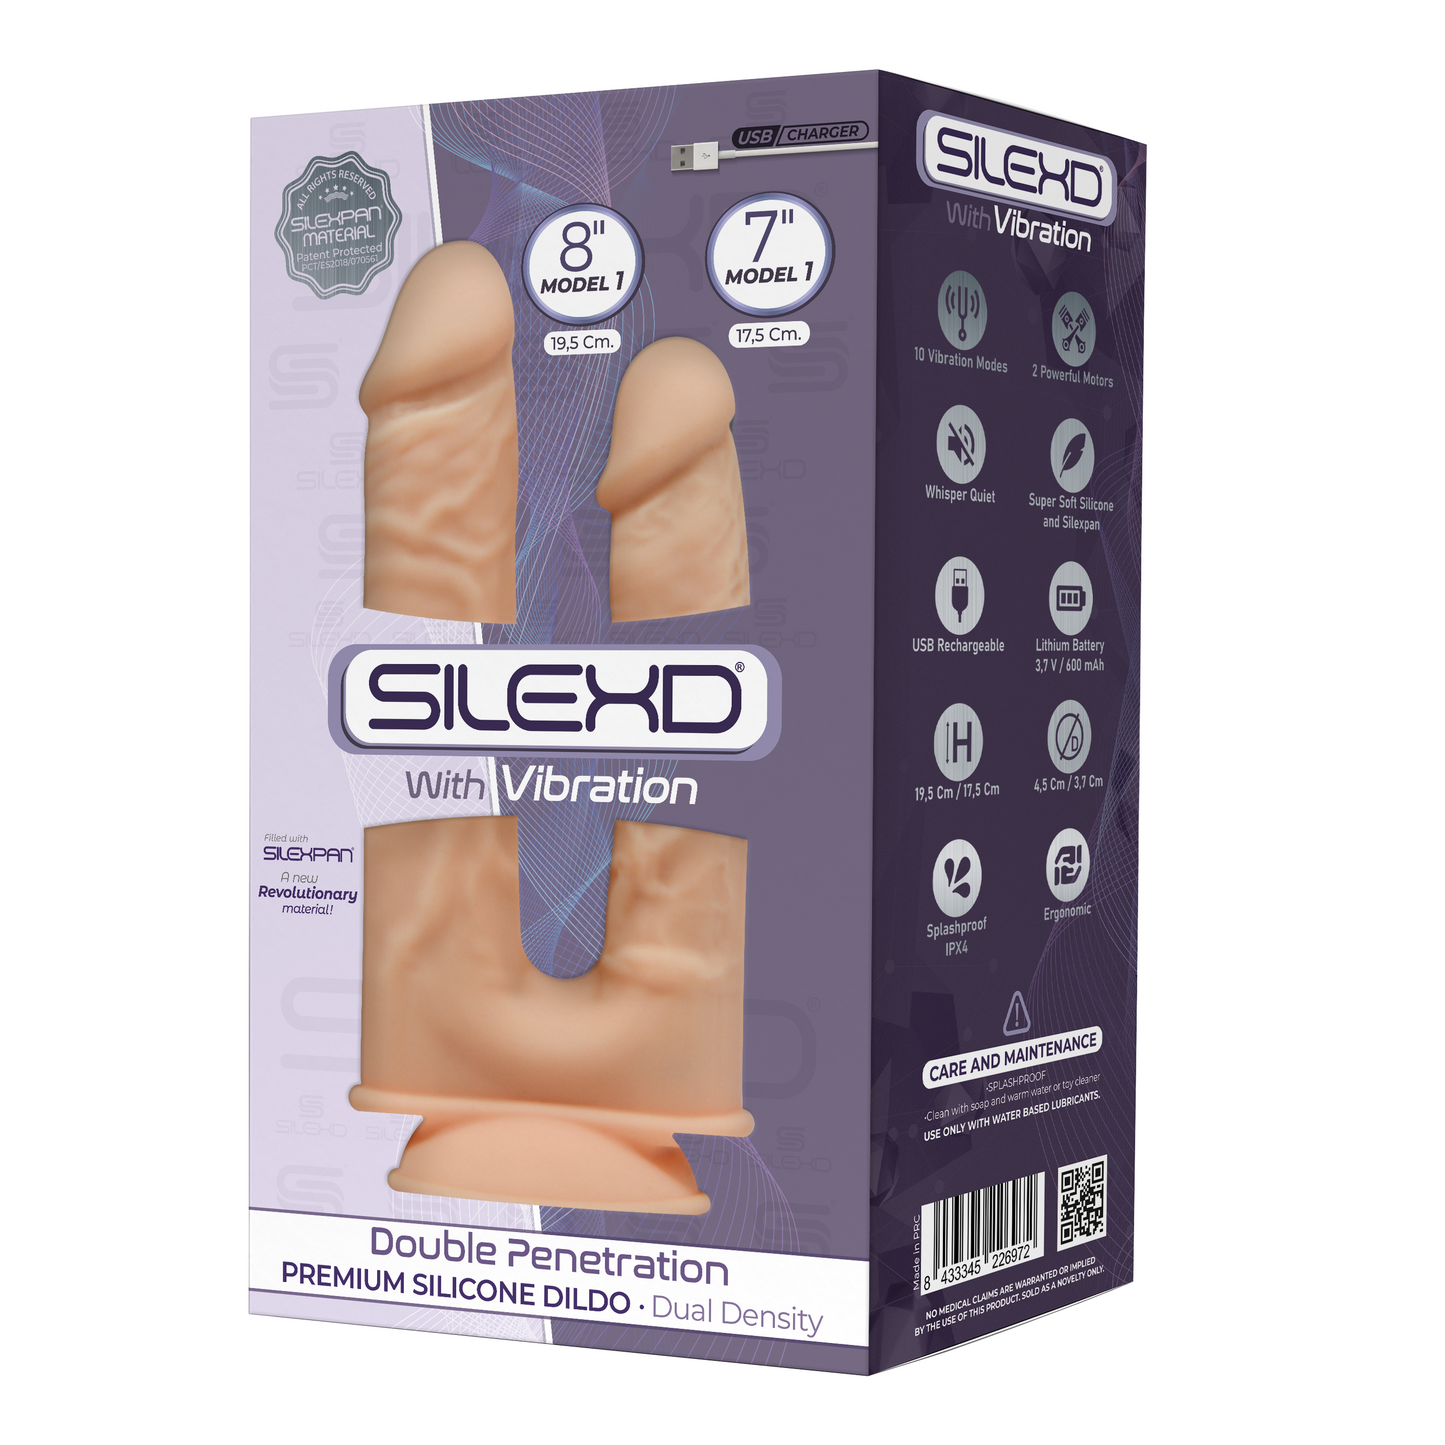 SILEXD MODEL 1 8 INCH AND 7 INCH DILDO